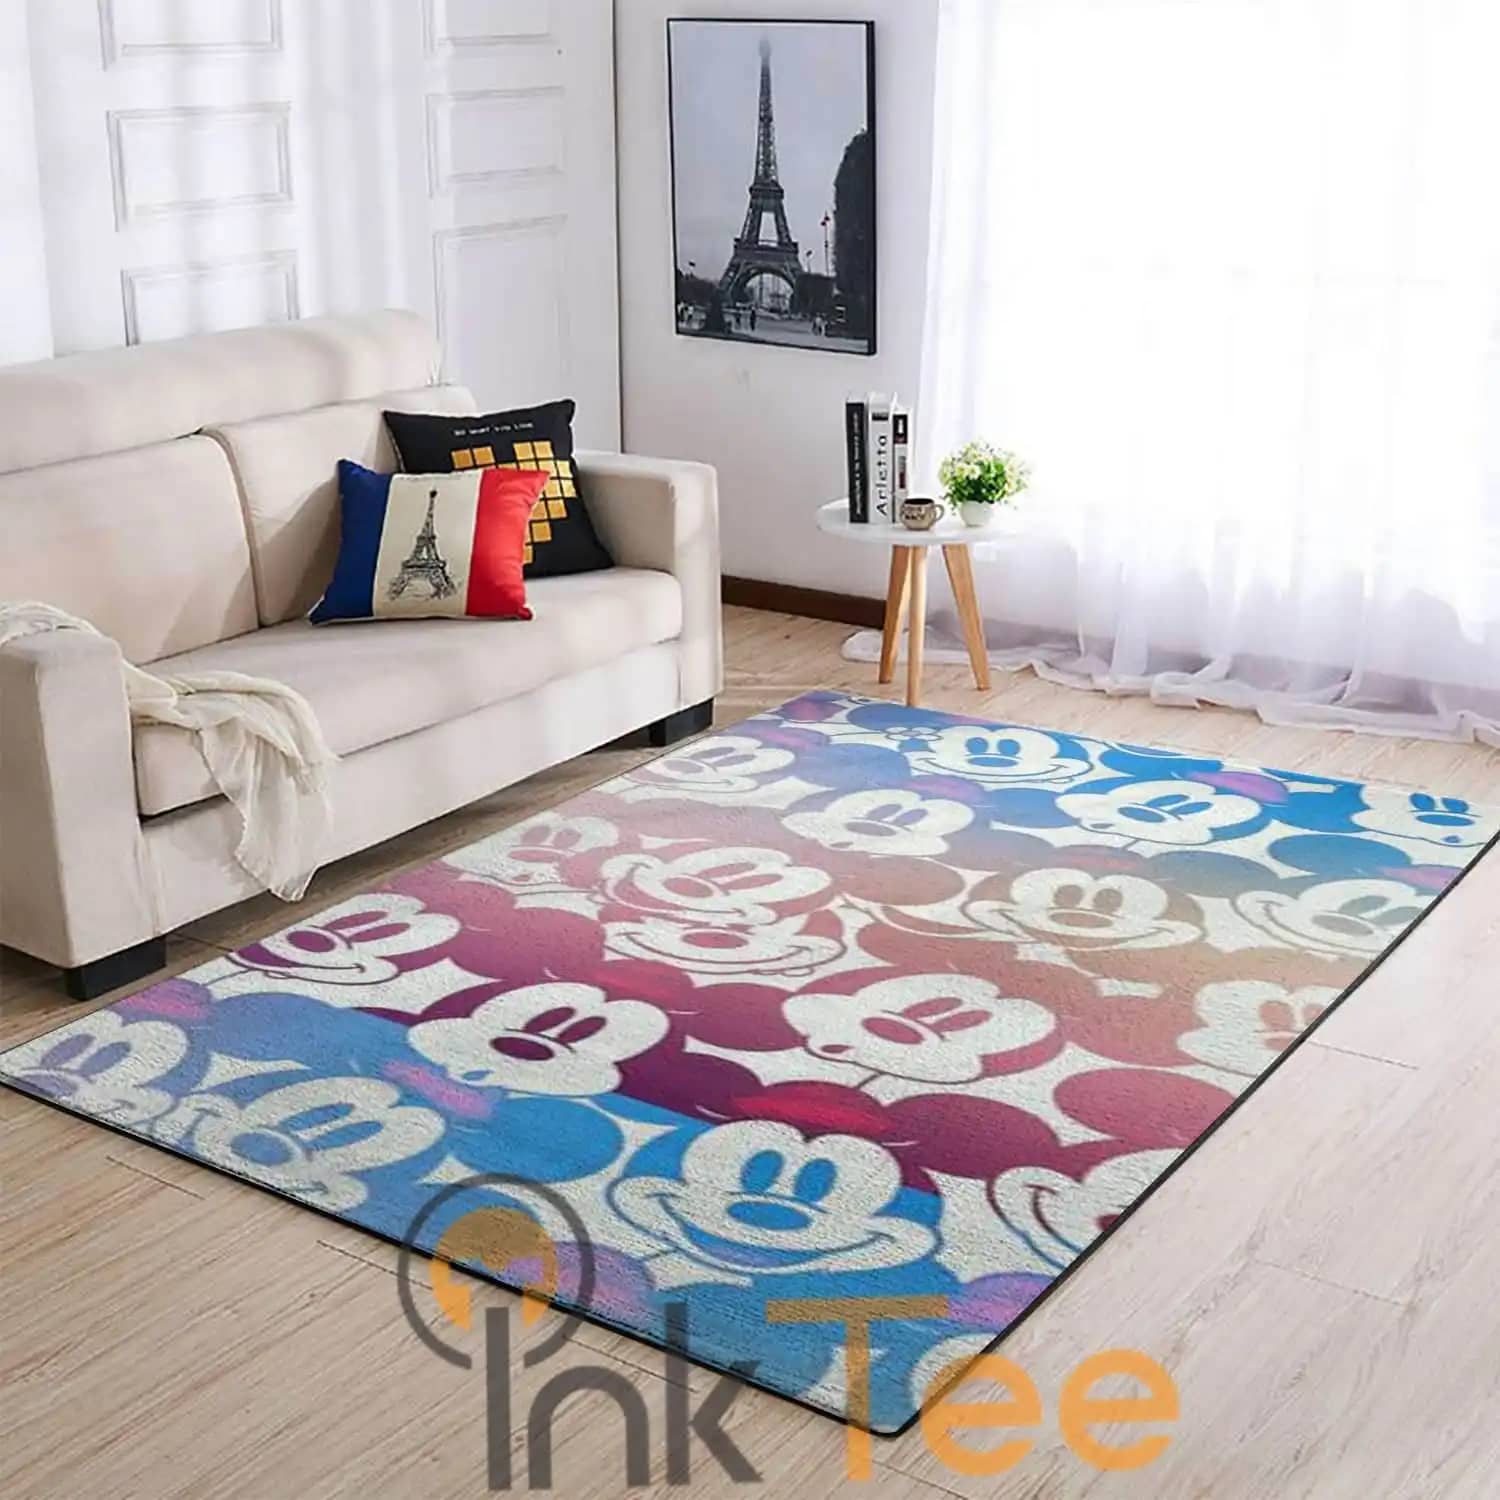 Colorful Mickey Mouse Living Room Area Amazon Best Seller 4097 Rug